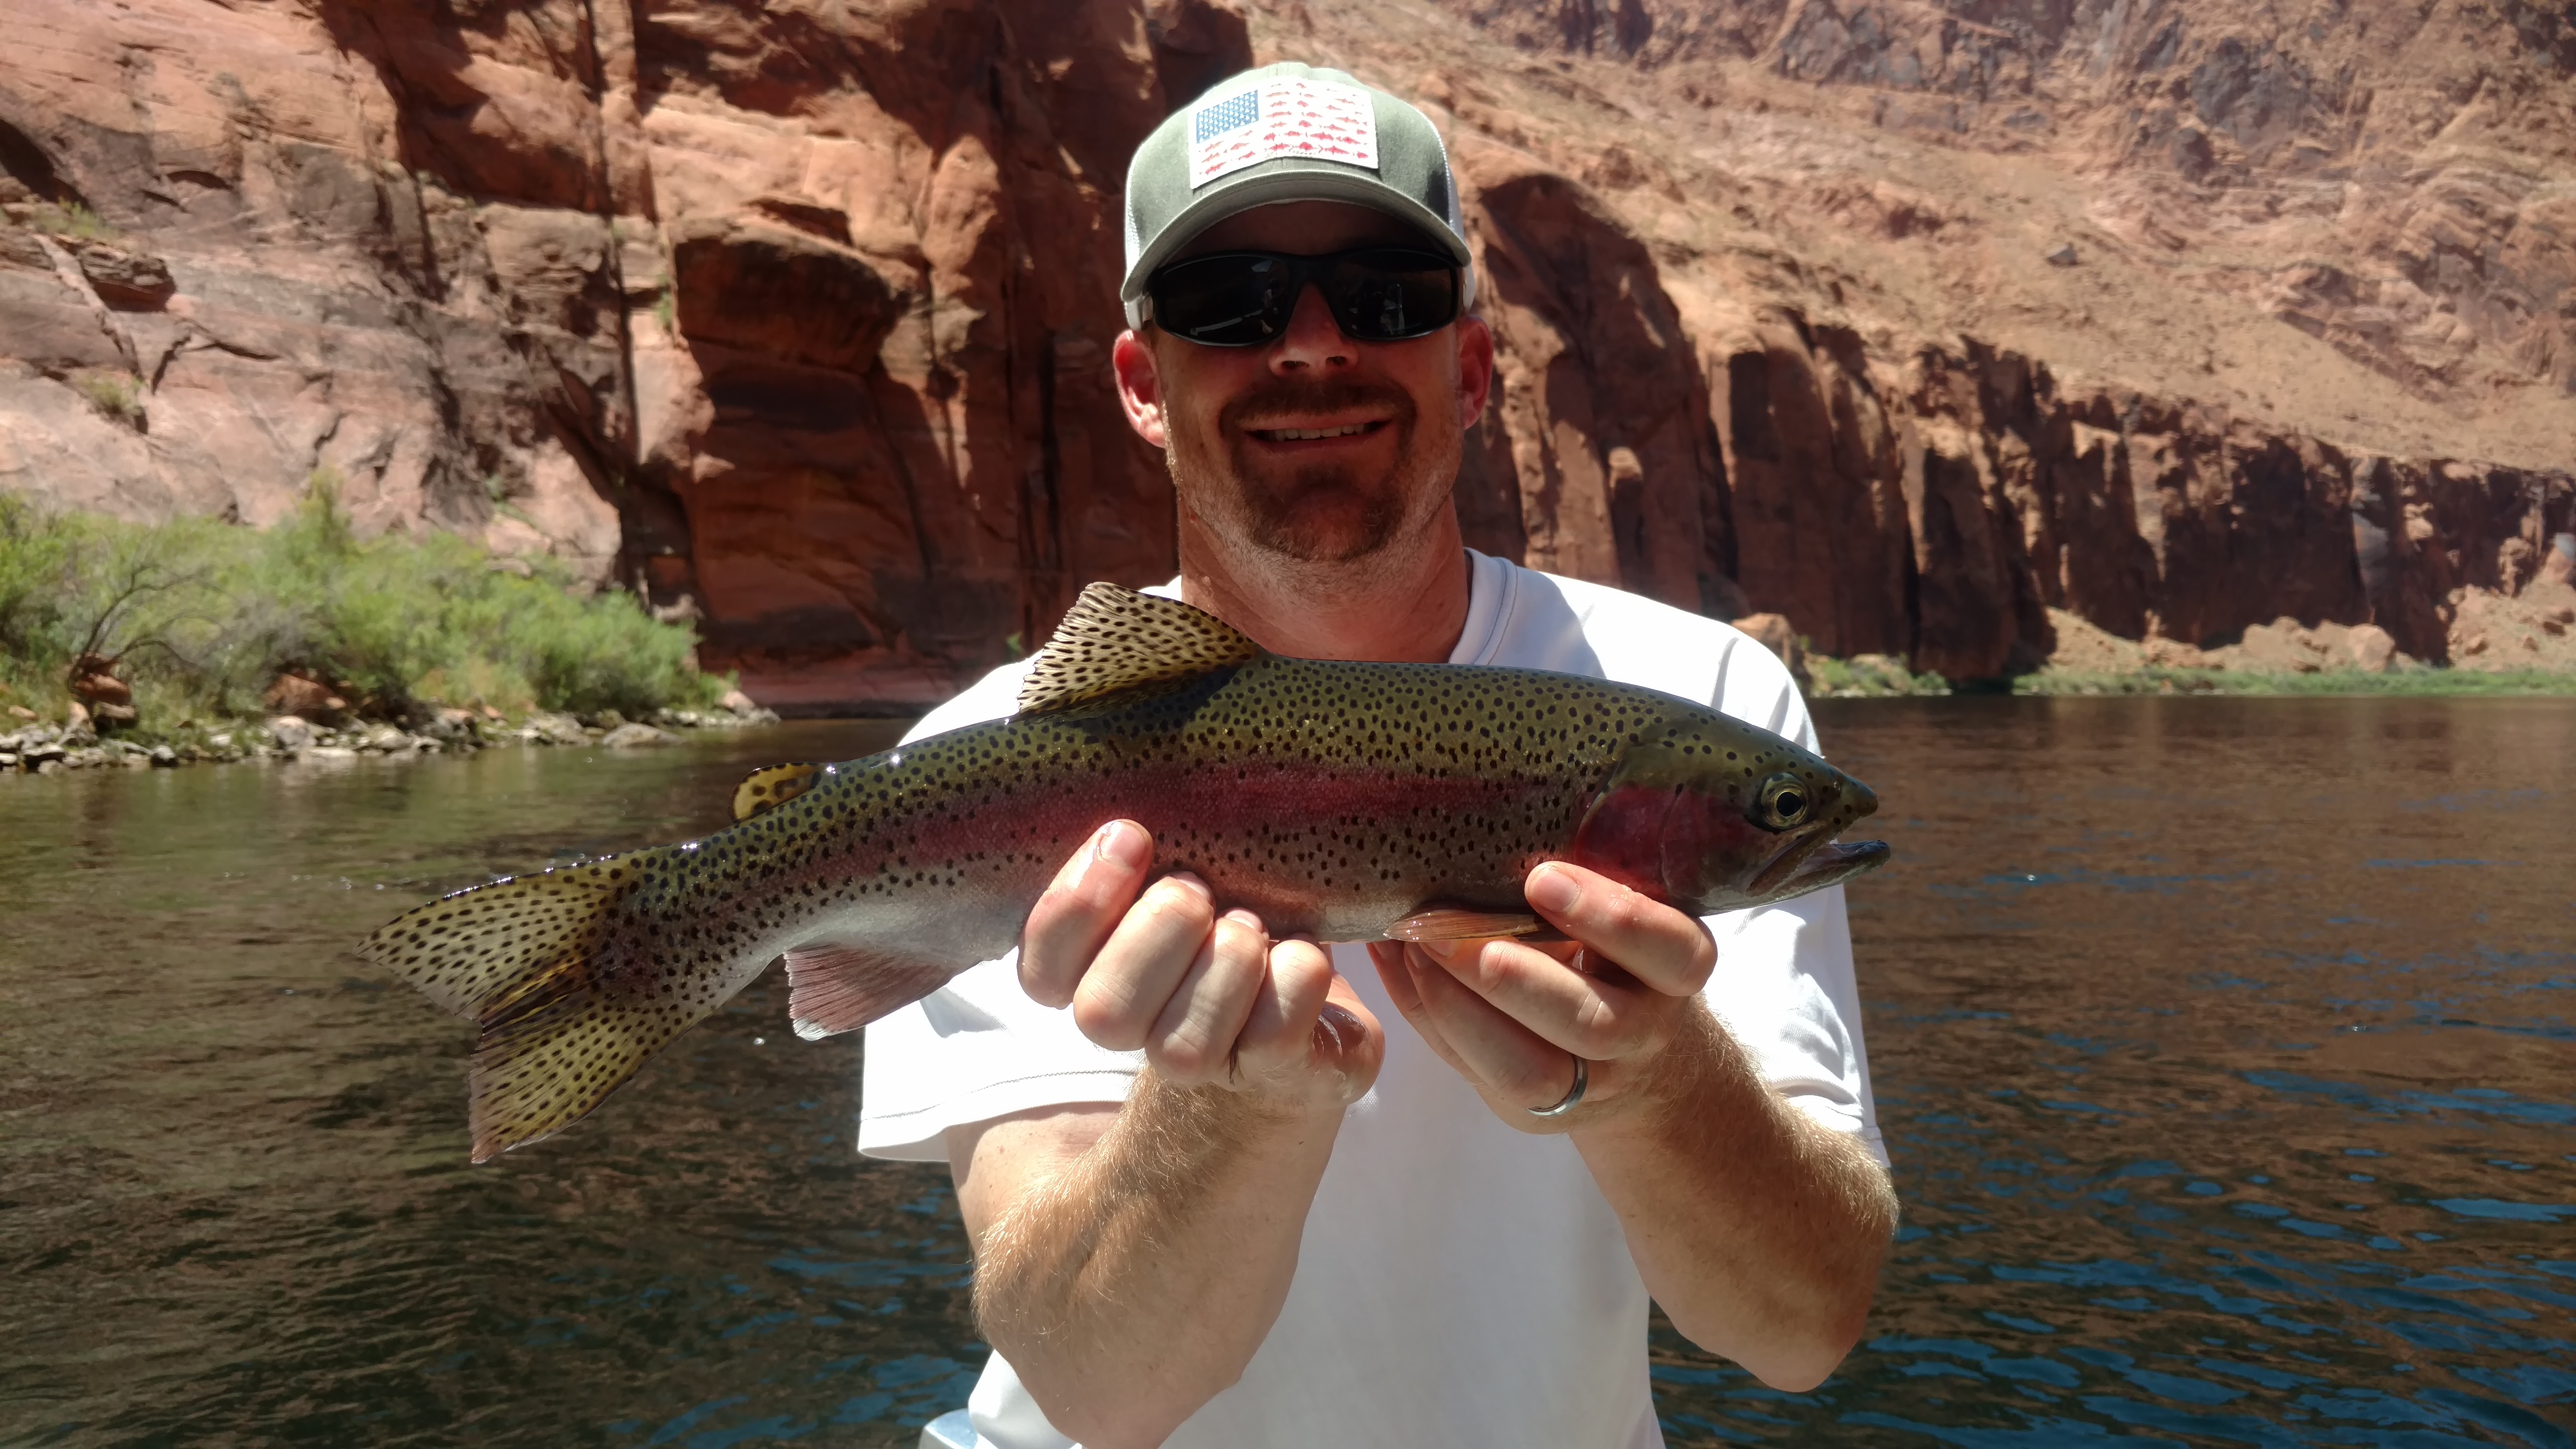 Horseshoe bend Kayak shuttles Lees Ferry fishing guides trout fly & spin  fishing on the Colorado river